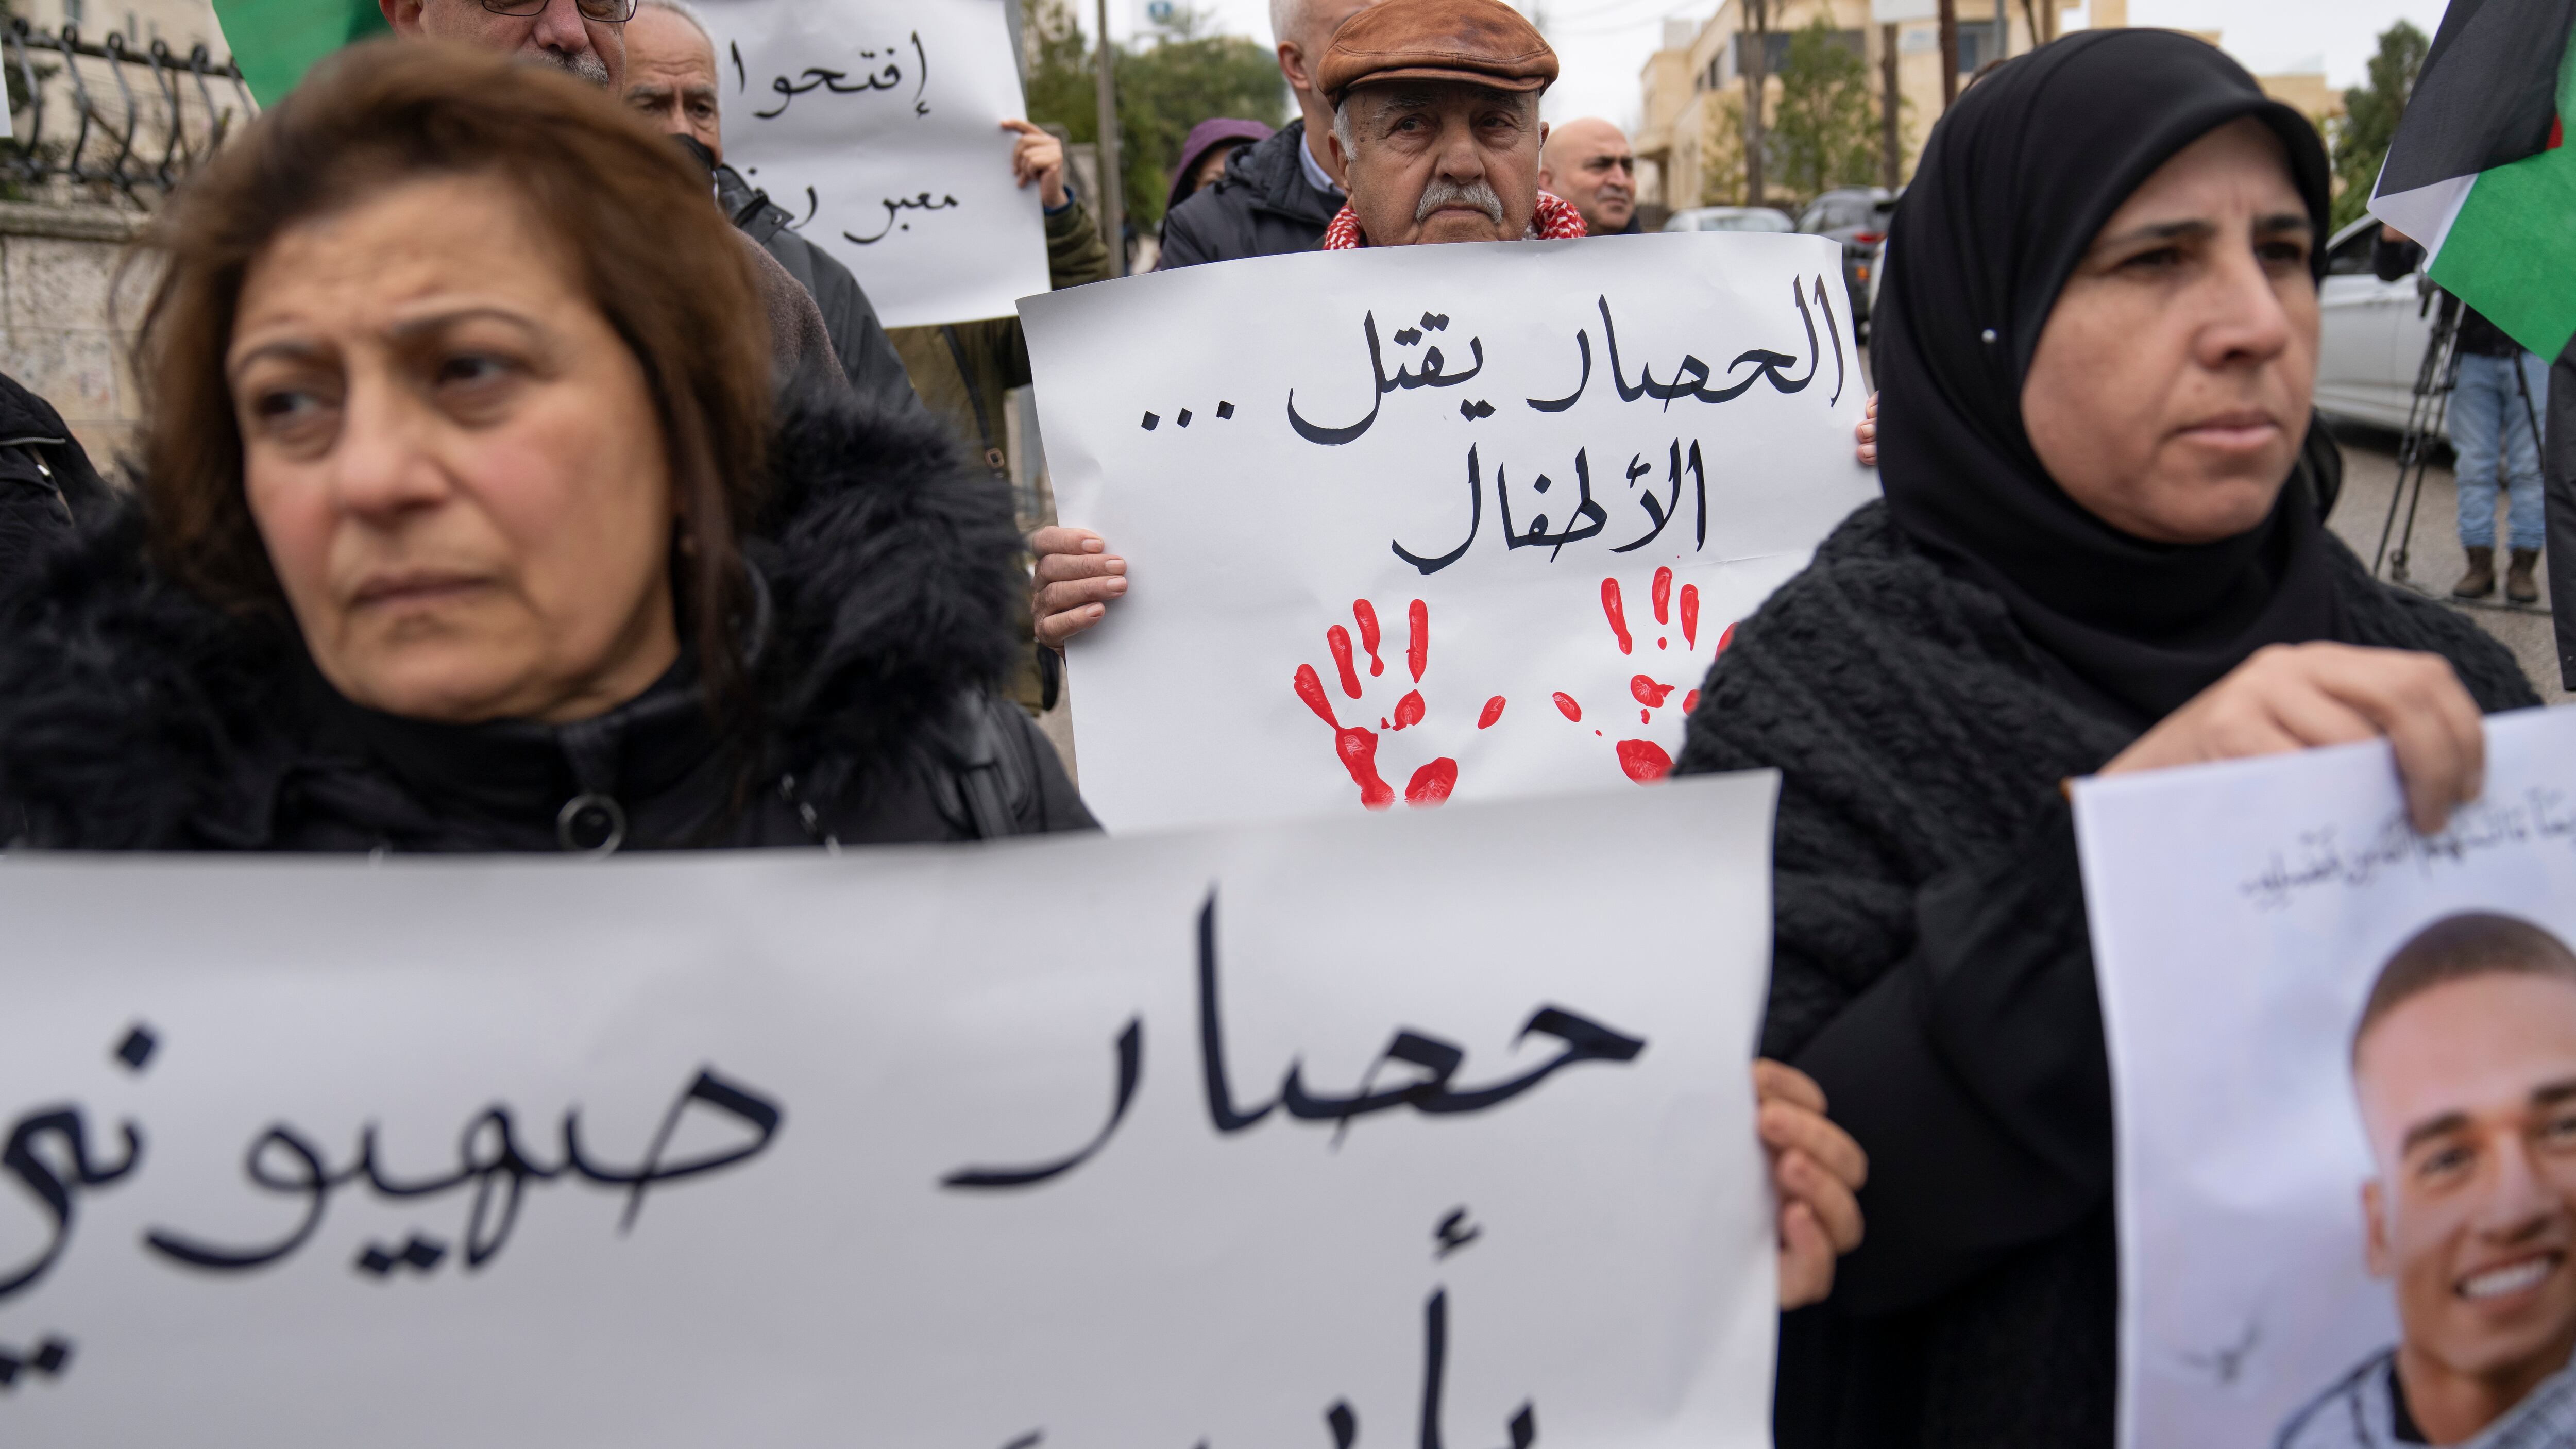 Palestinian activists carry posters, one reads ‘the siege is killing the children’ while protesting in front of the Egyptian embassy, in the West Bank city of Ramallah (Nasser Nasser/AP)